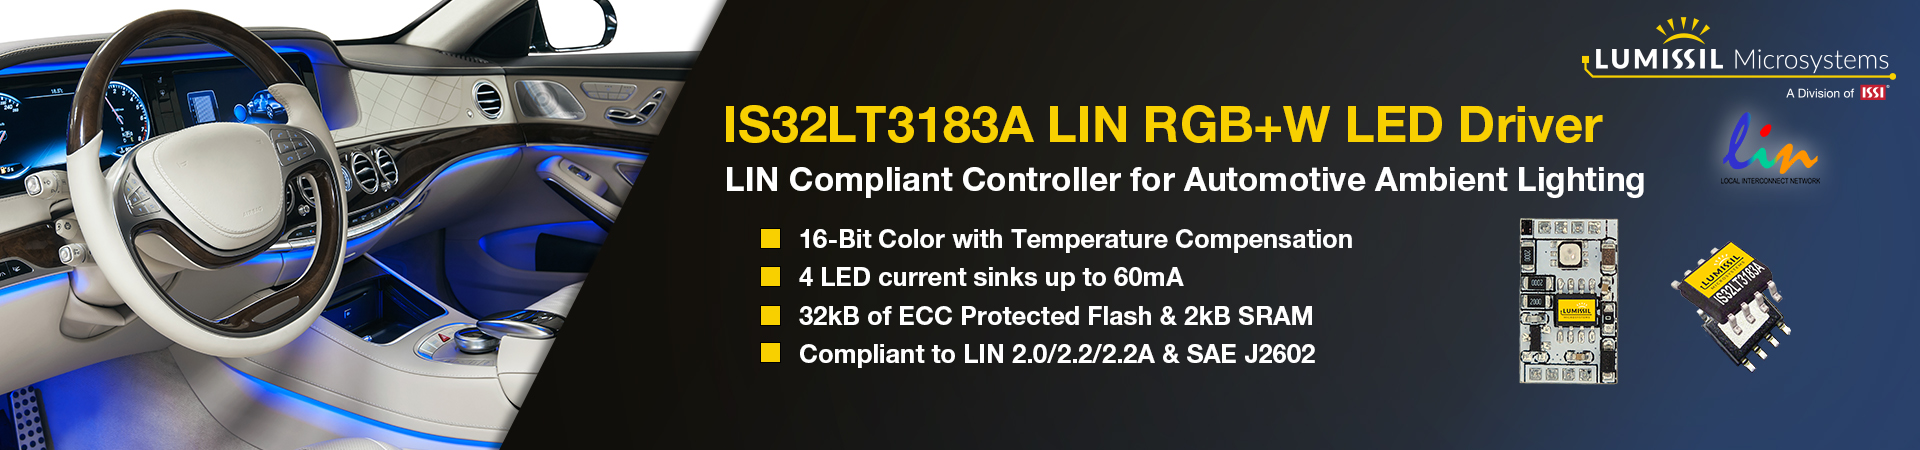 60mA LED Current for ambient and animated interior or exterior automotive lighting applications